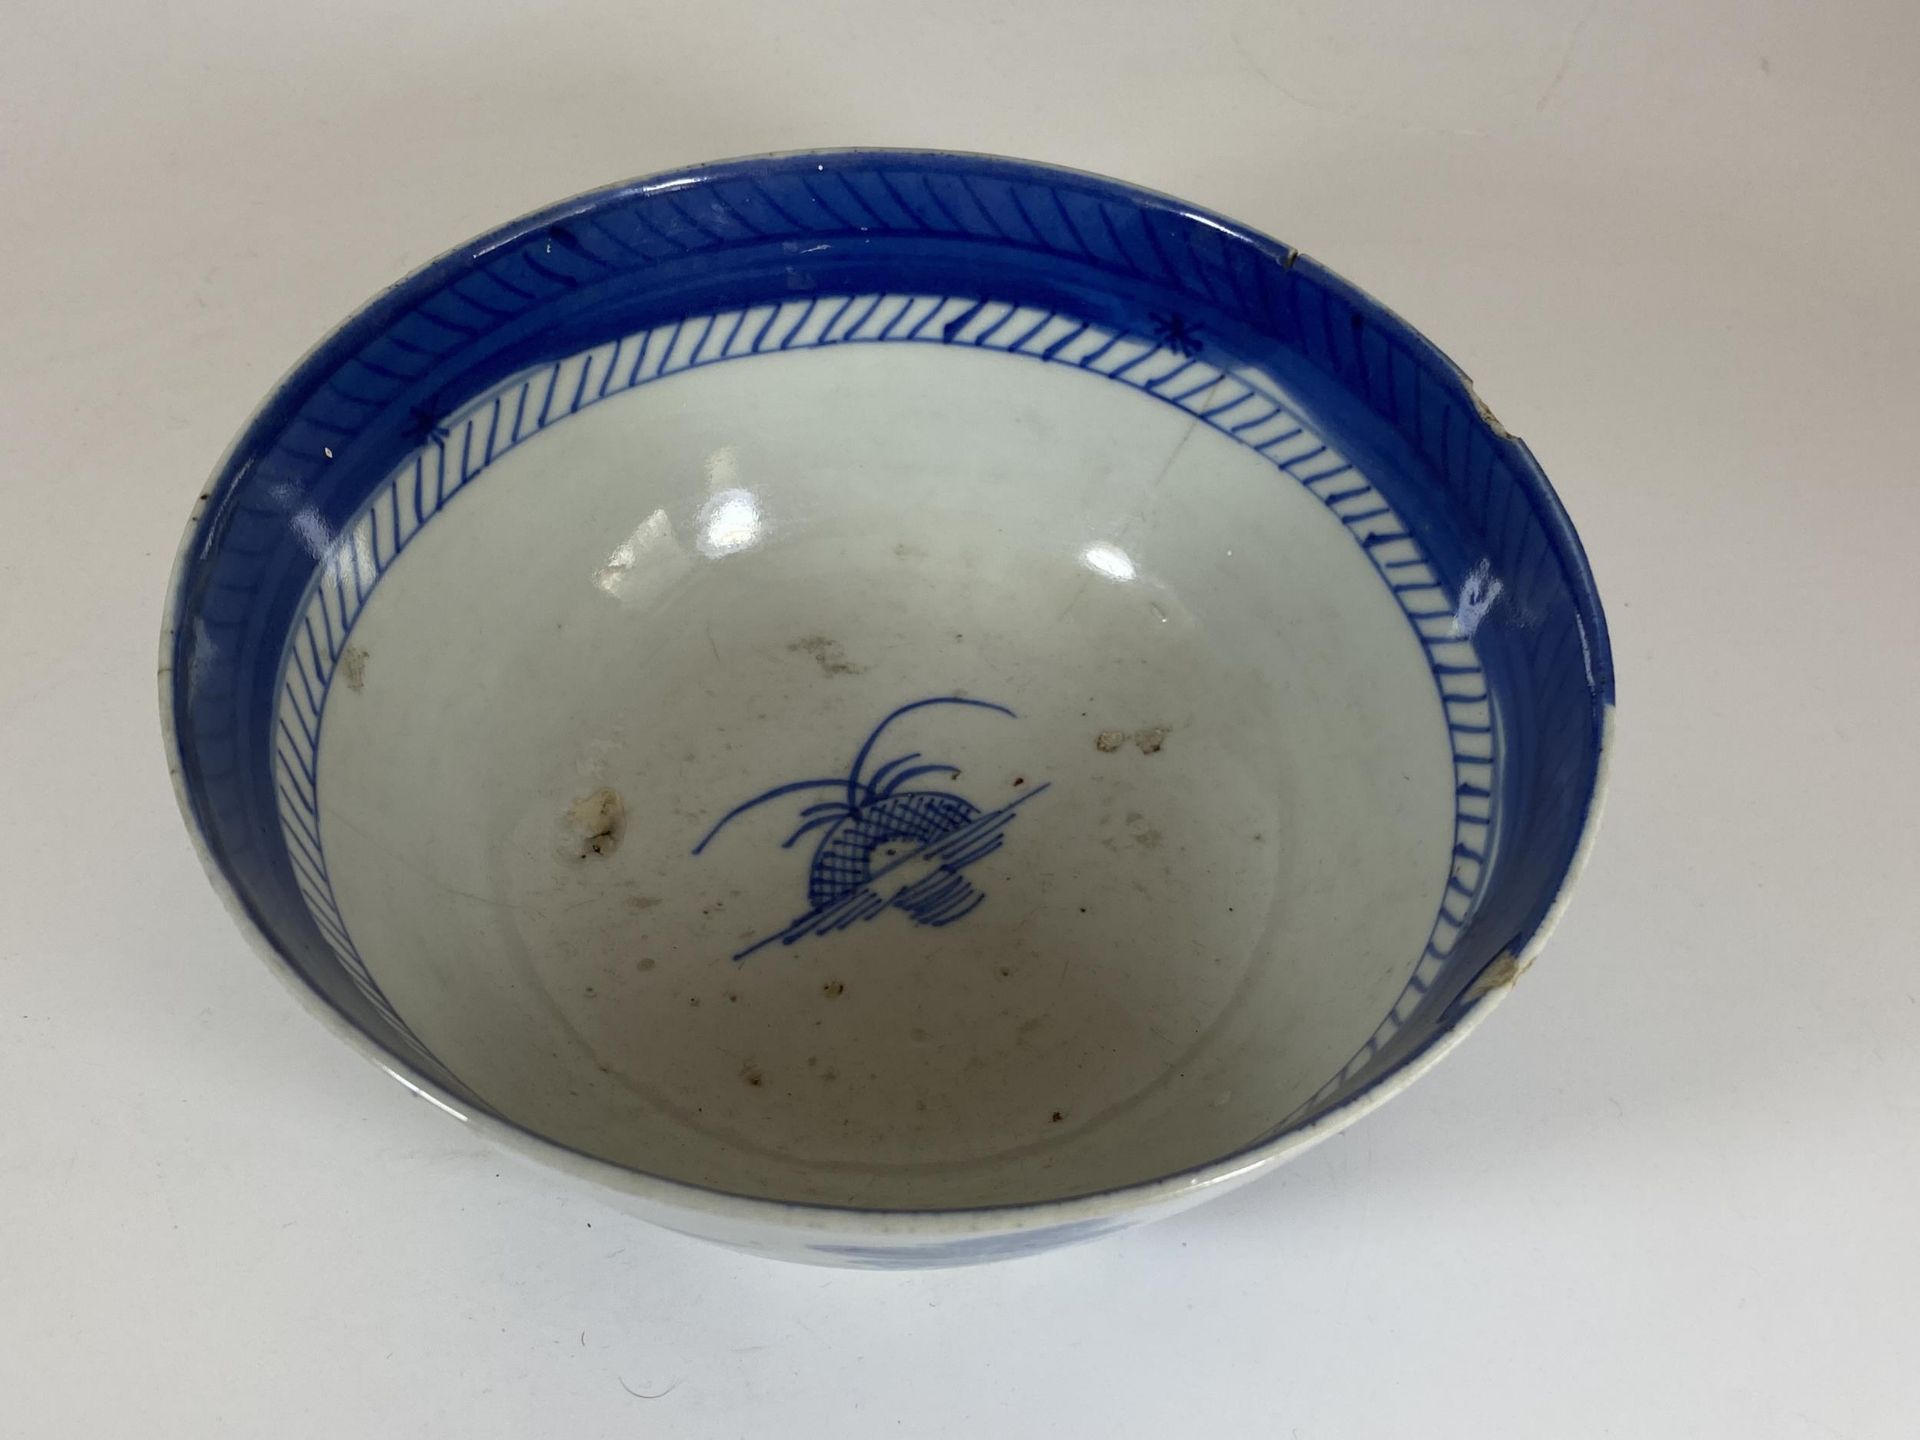 A 19TH CENTURY CHINESE EXPORT BLUE AND WHITE PORCELAIN BOWL WITH PAGODA DESIGN, DIAMETER 17CM - Image 3 of 6